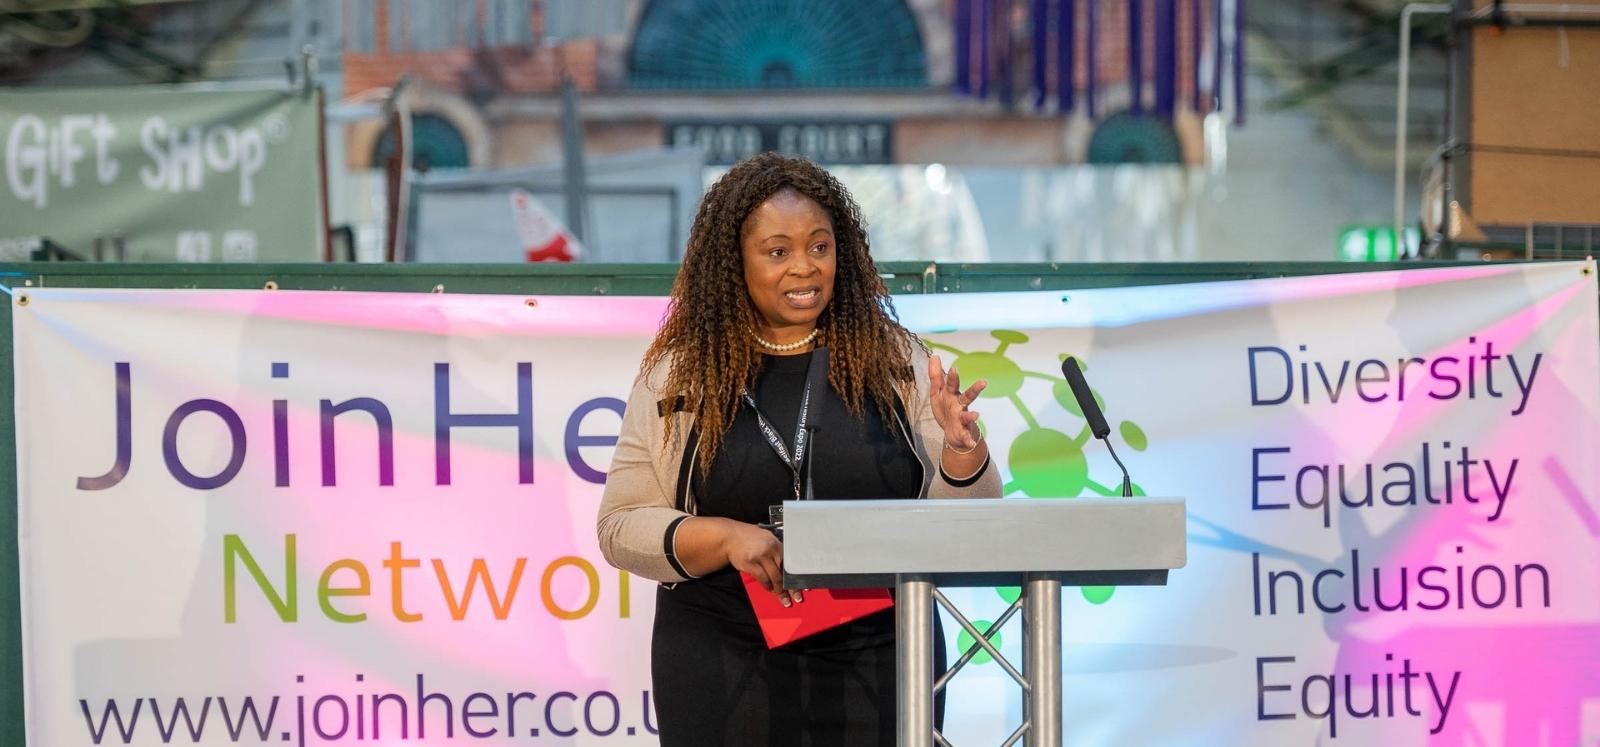 JustHer Network representative speaking at the Black History Month expo, St George's Market